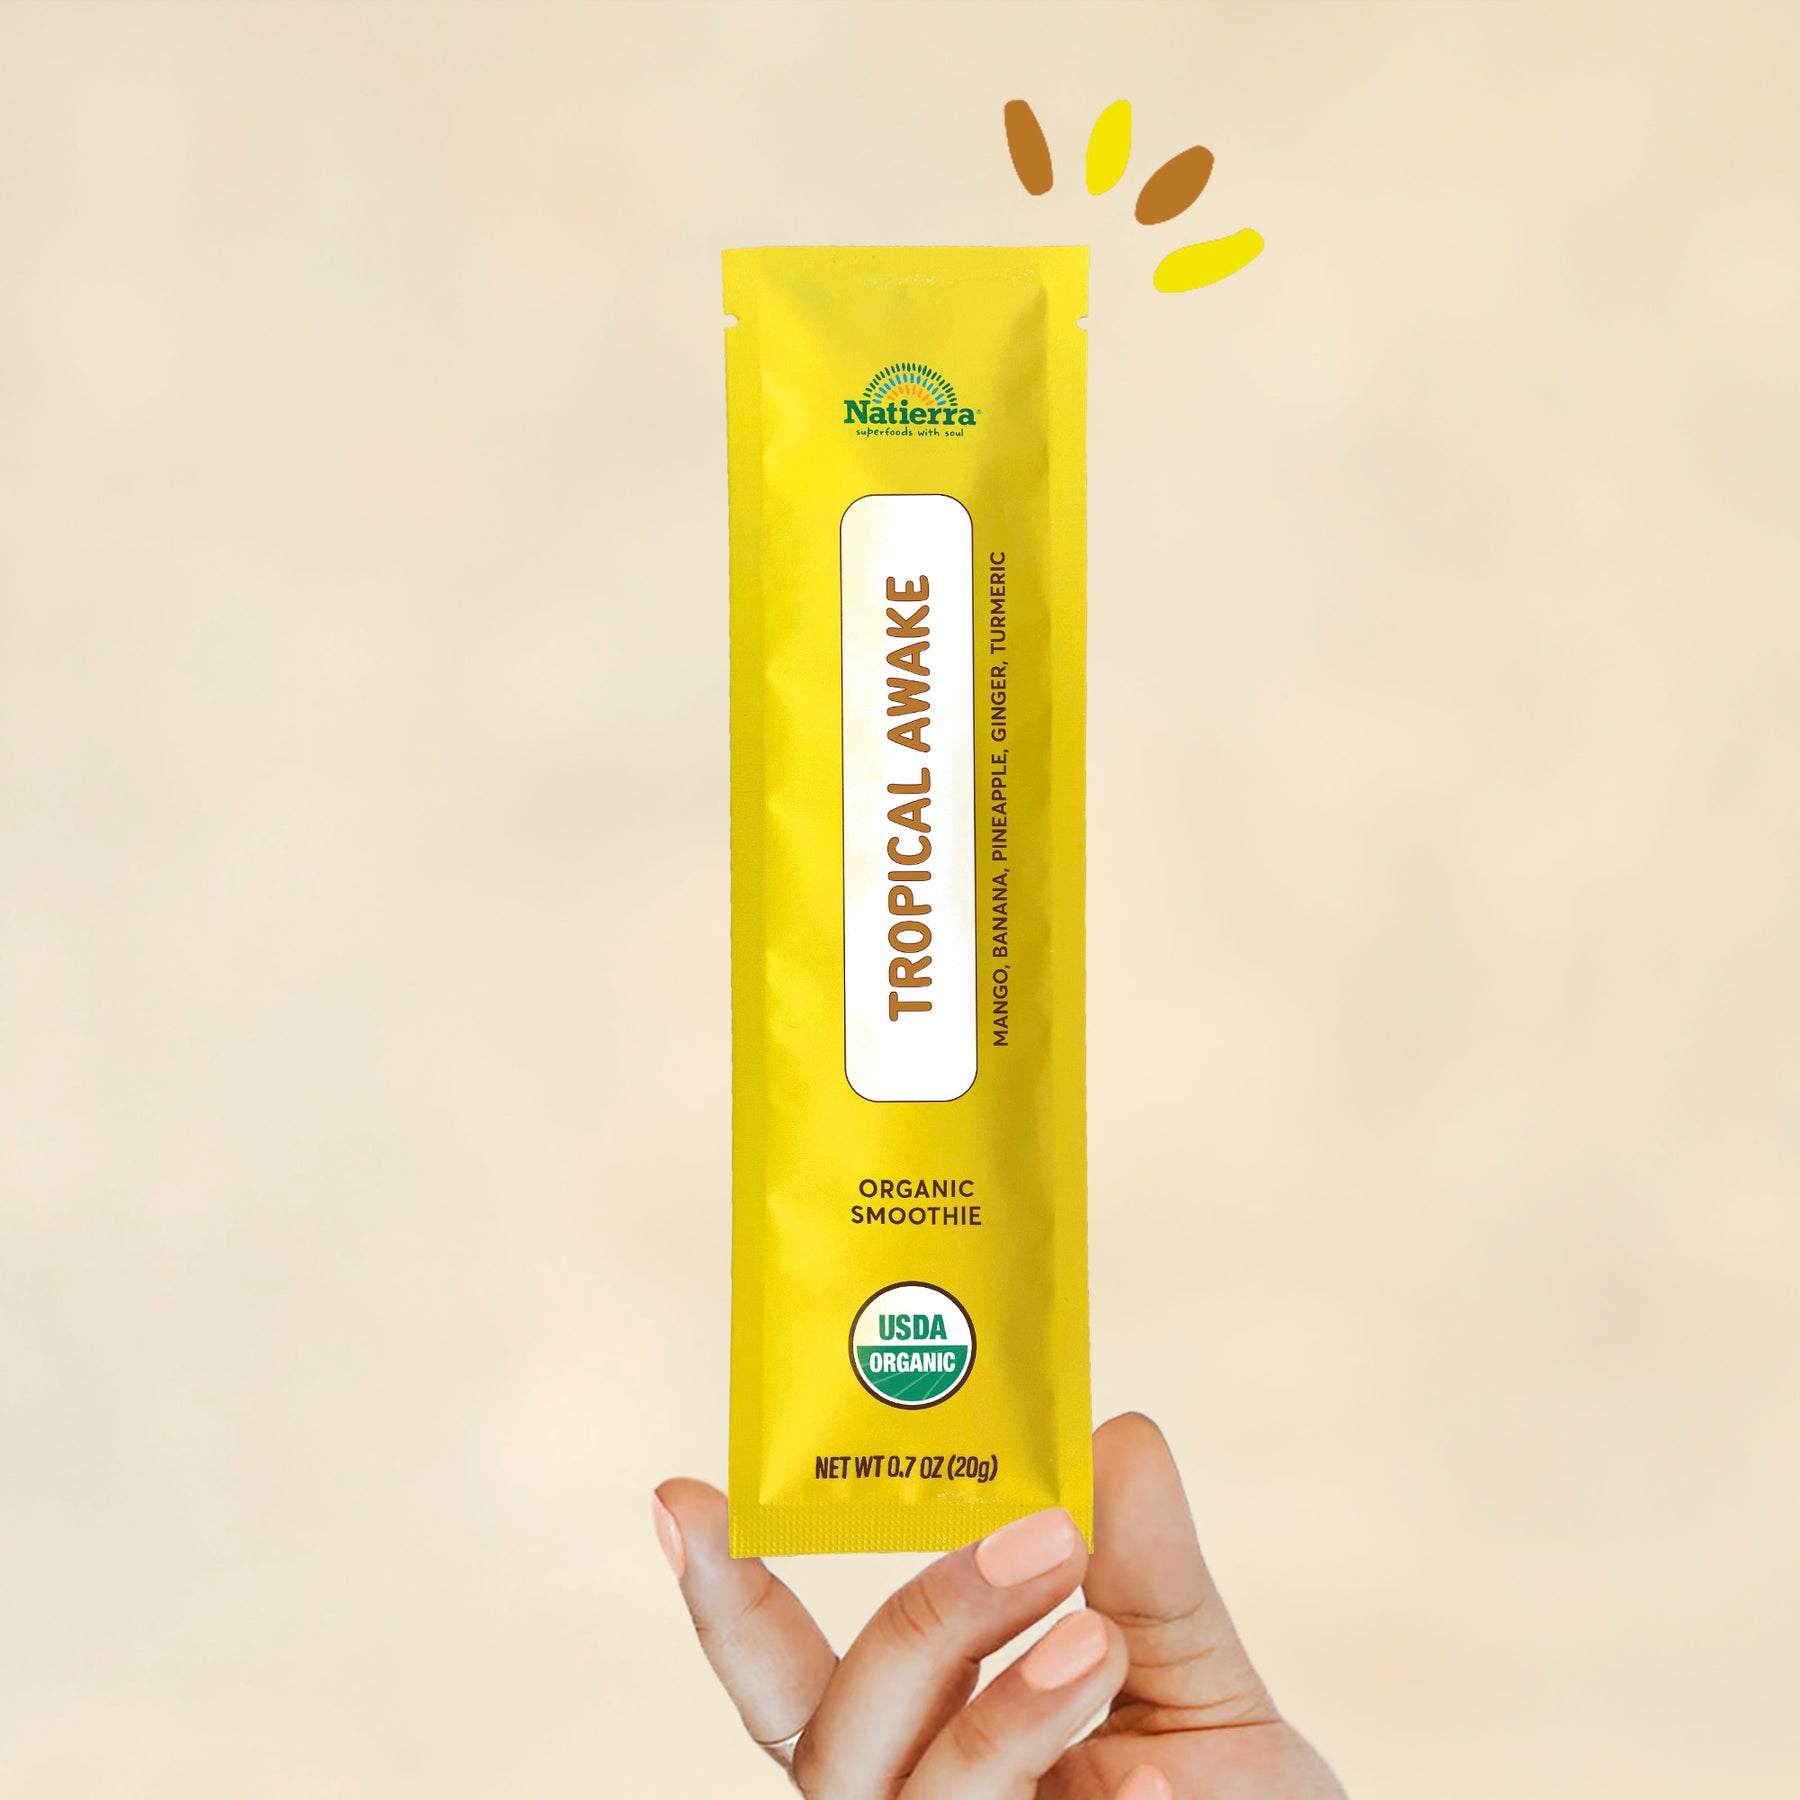 Individual stick pack of Natierra's Tropical Awake Organic Smoothie held by a hand in front of a creme background